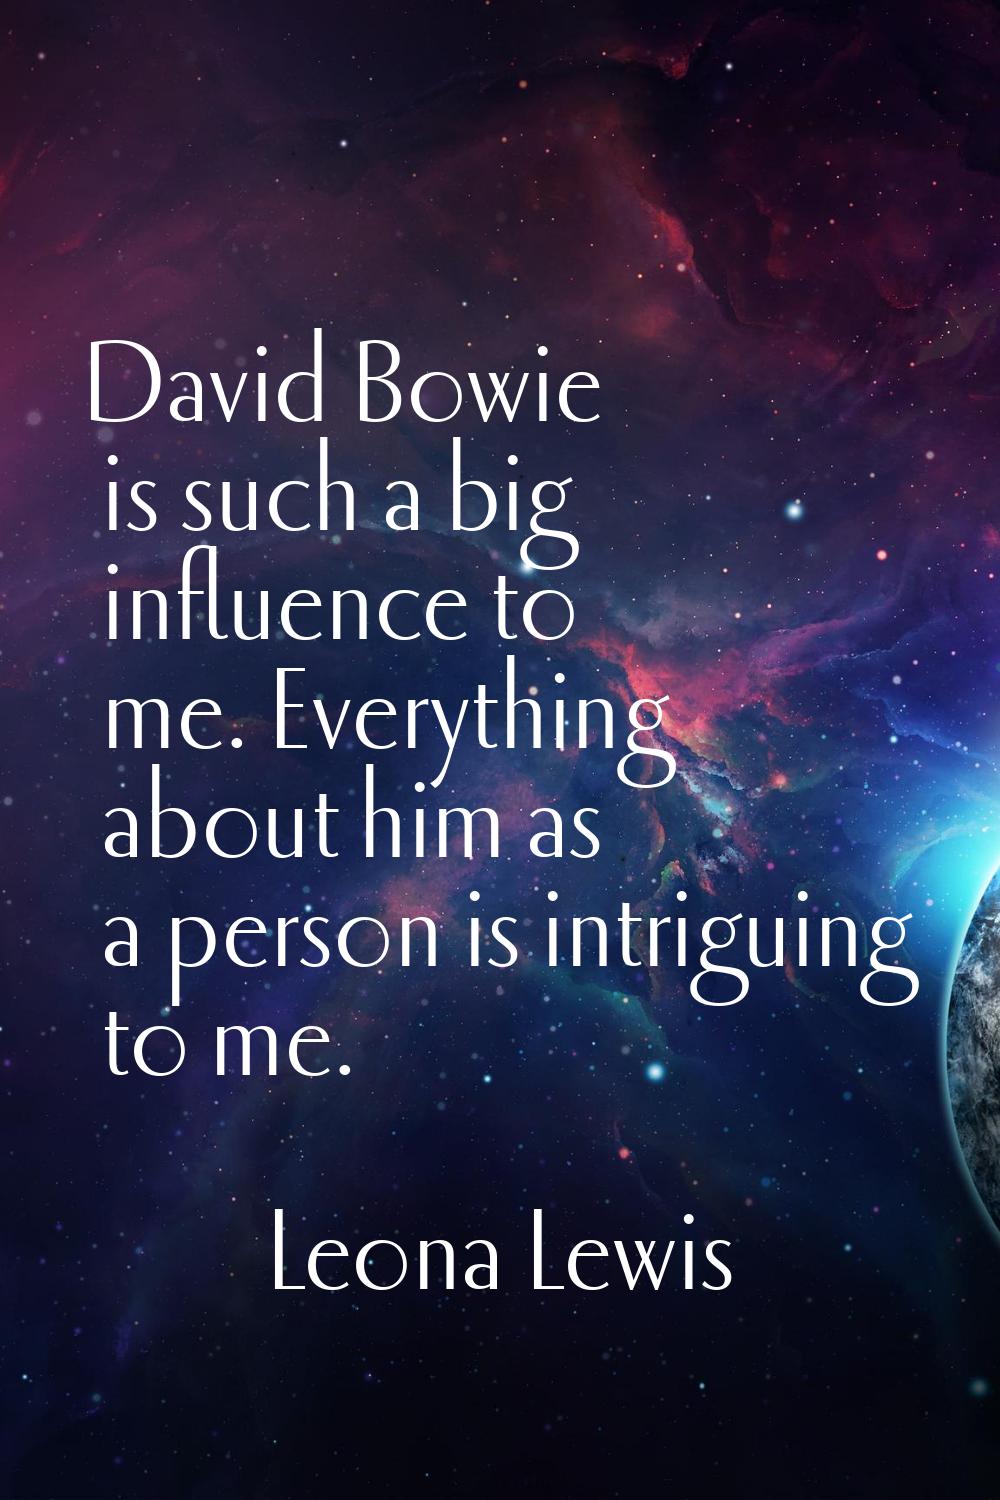 David Bowie is such a big influence to me. Everything about him as a person is intriguing to me.